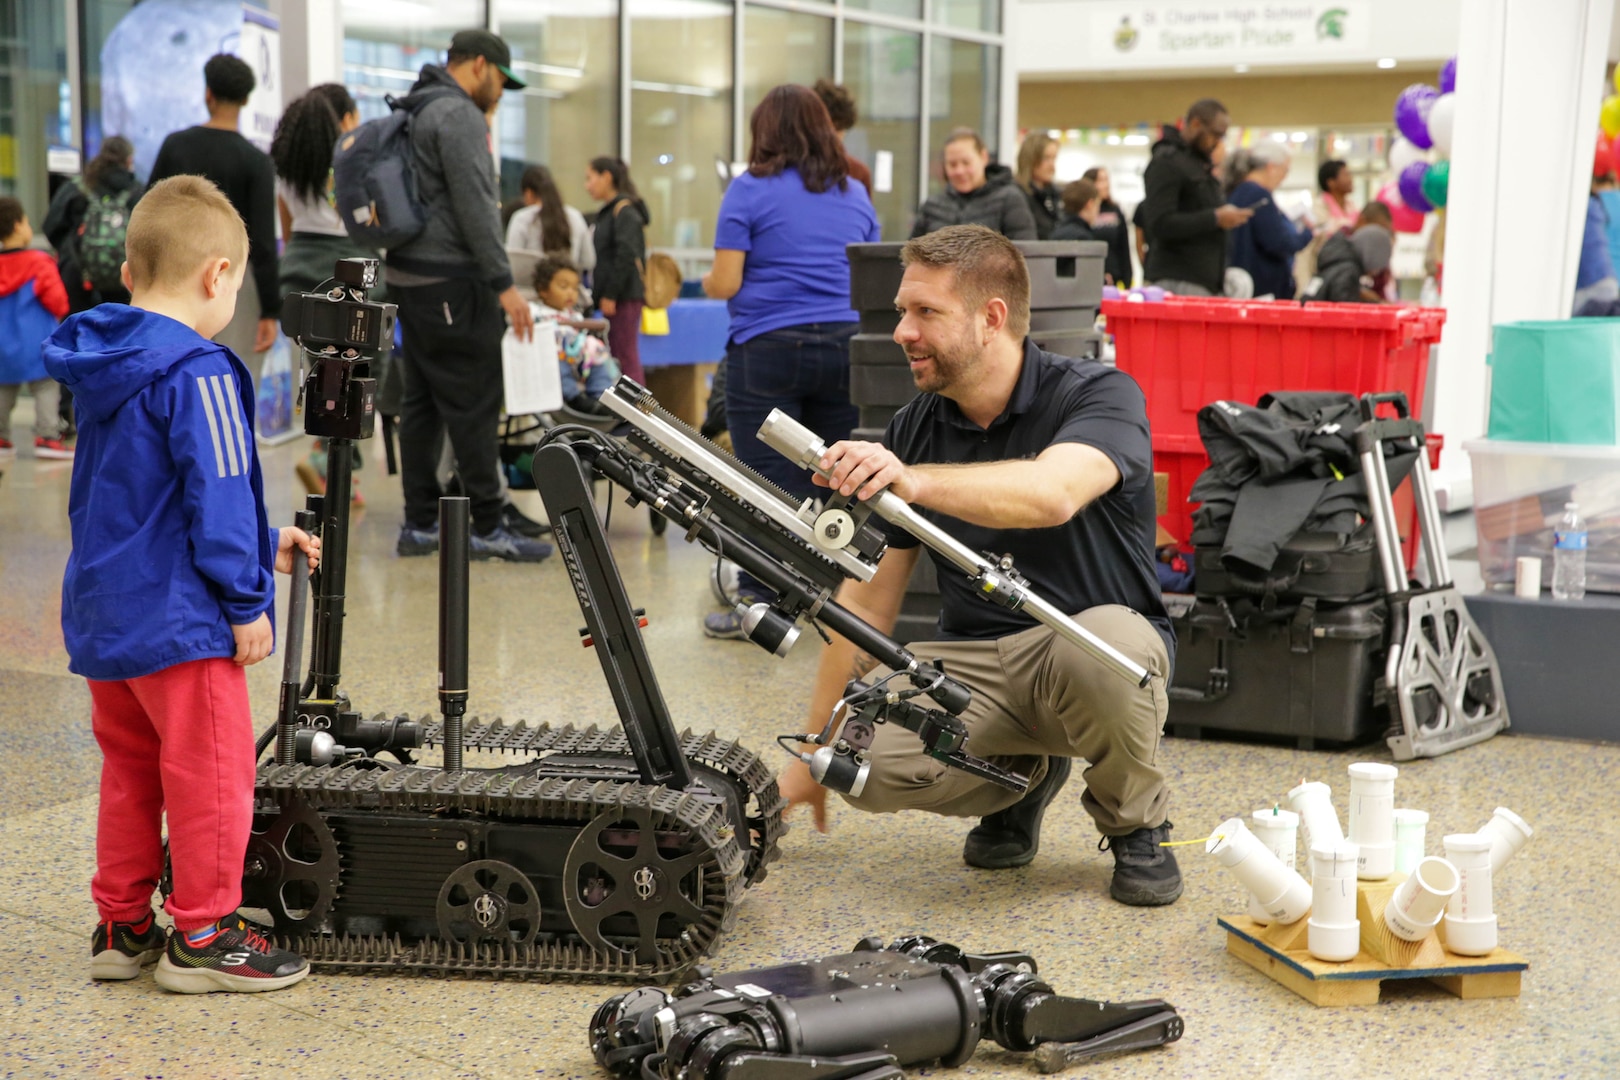 A robotics technician in NSWC IHD’s Unmanned Systems Branch, and a young attendee of the History, Industry, Technology and Science Expo interact with an explosive ordnance disposal robot at St. Charles High School in Waldorf, Maryland, on March 9.